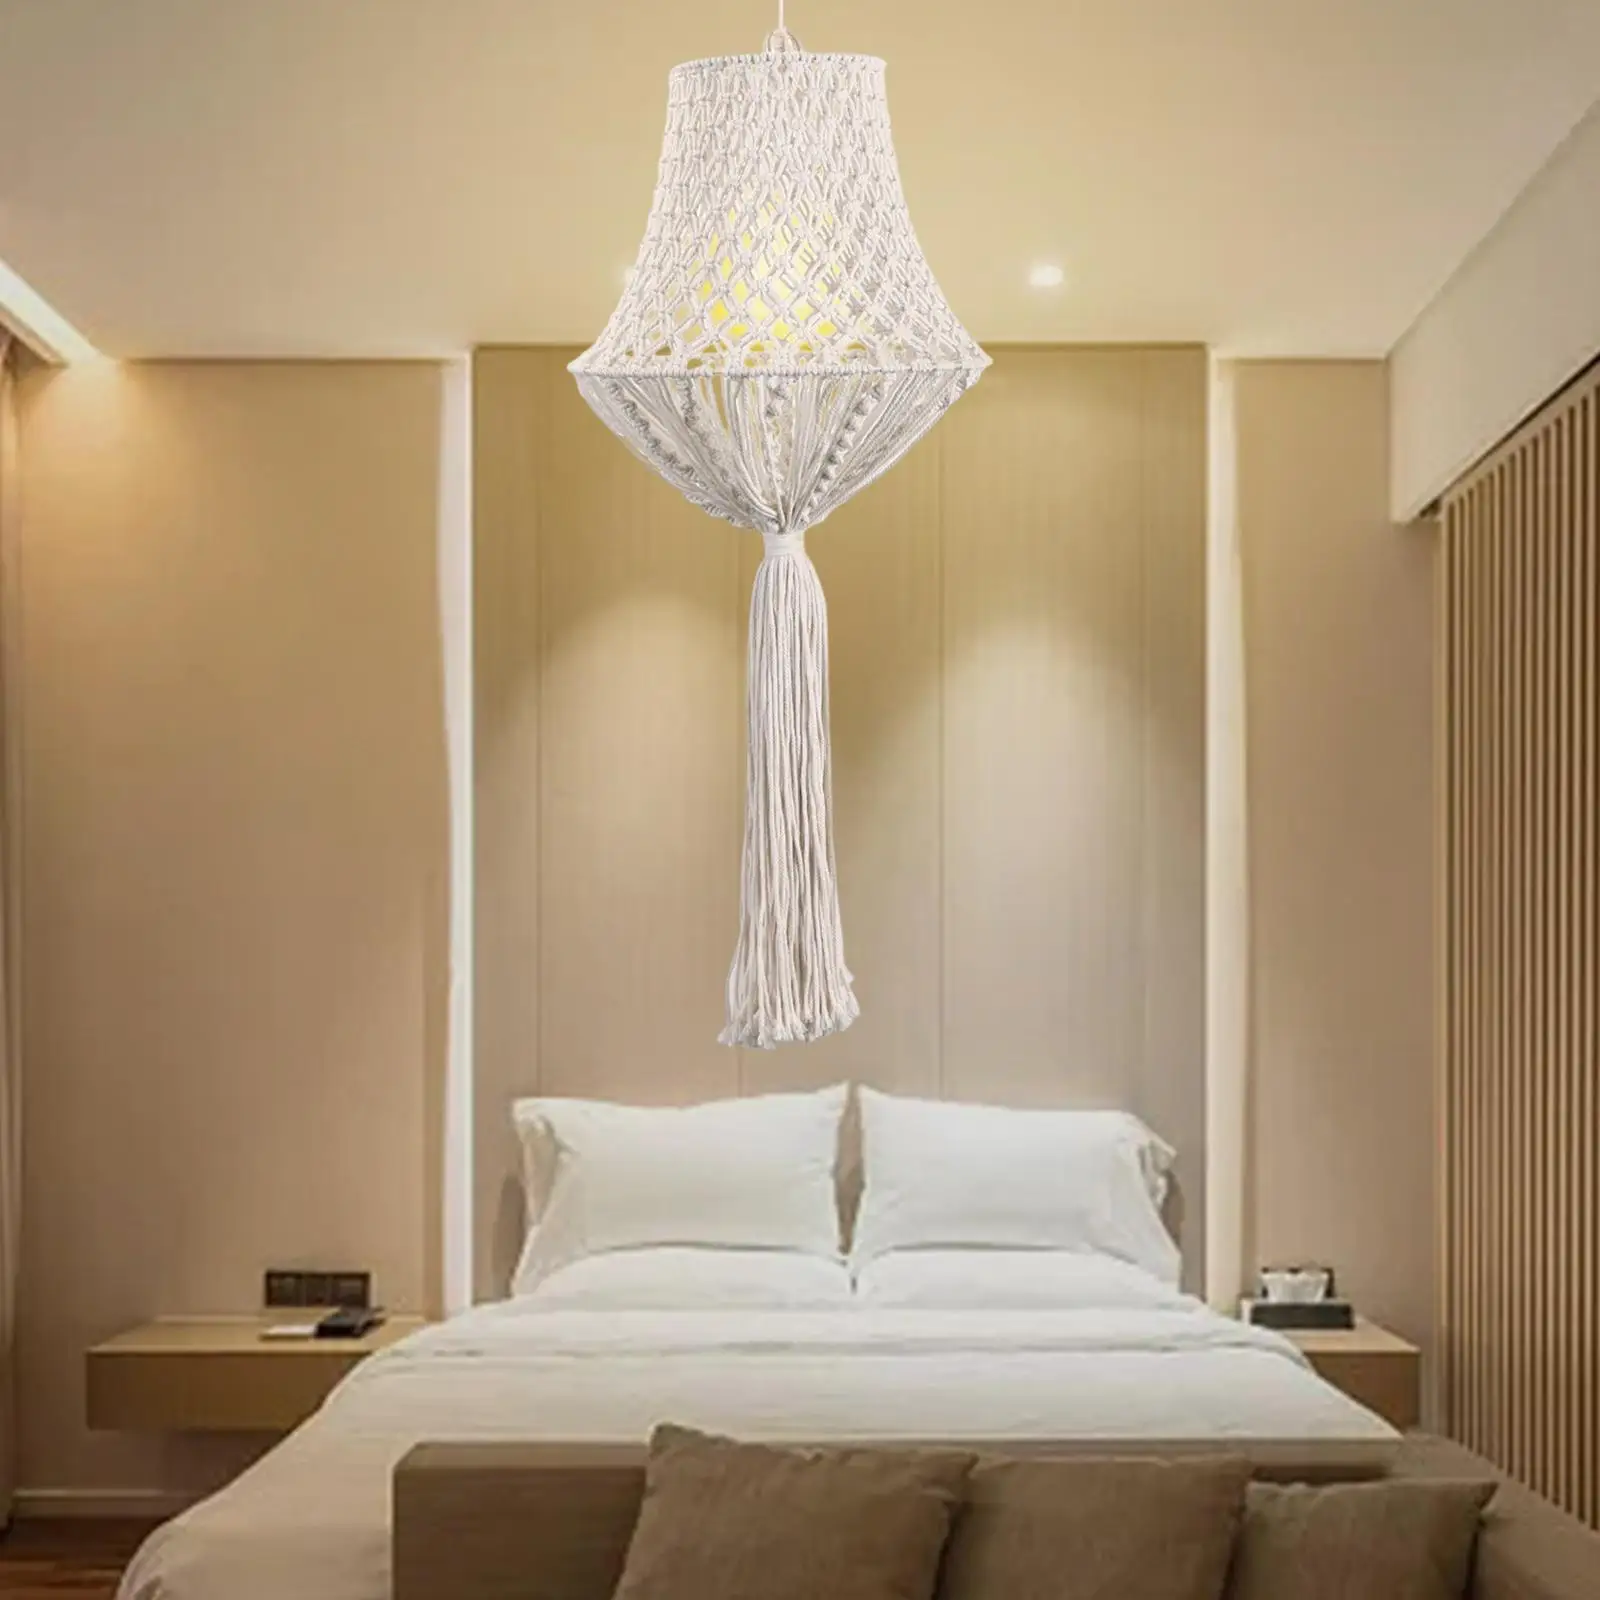 Macrame Lamp Shade Handmade Weaving Ceiling Light Shade Hanging Pendant Light Cover Chandelier Lampshade for Home Decorative